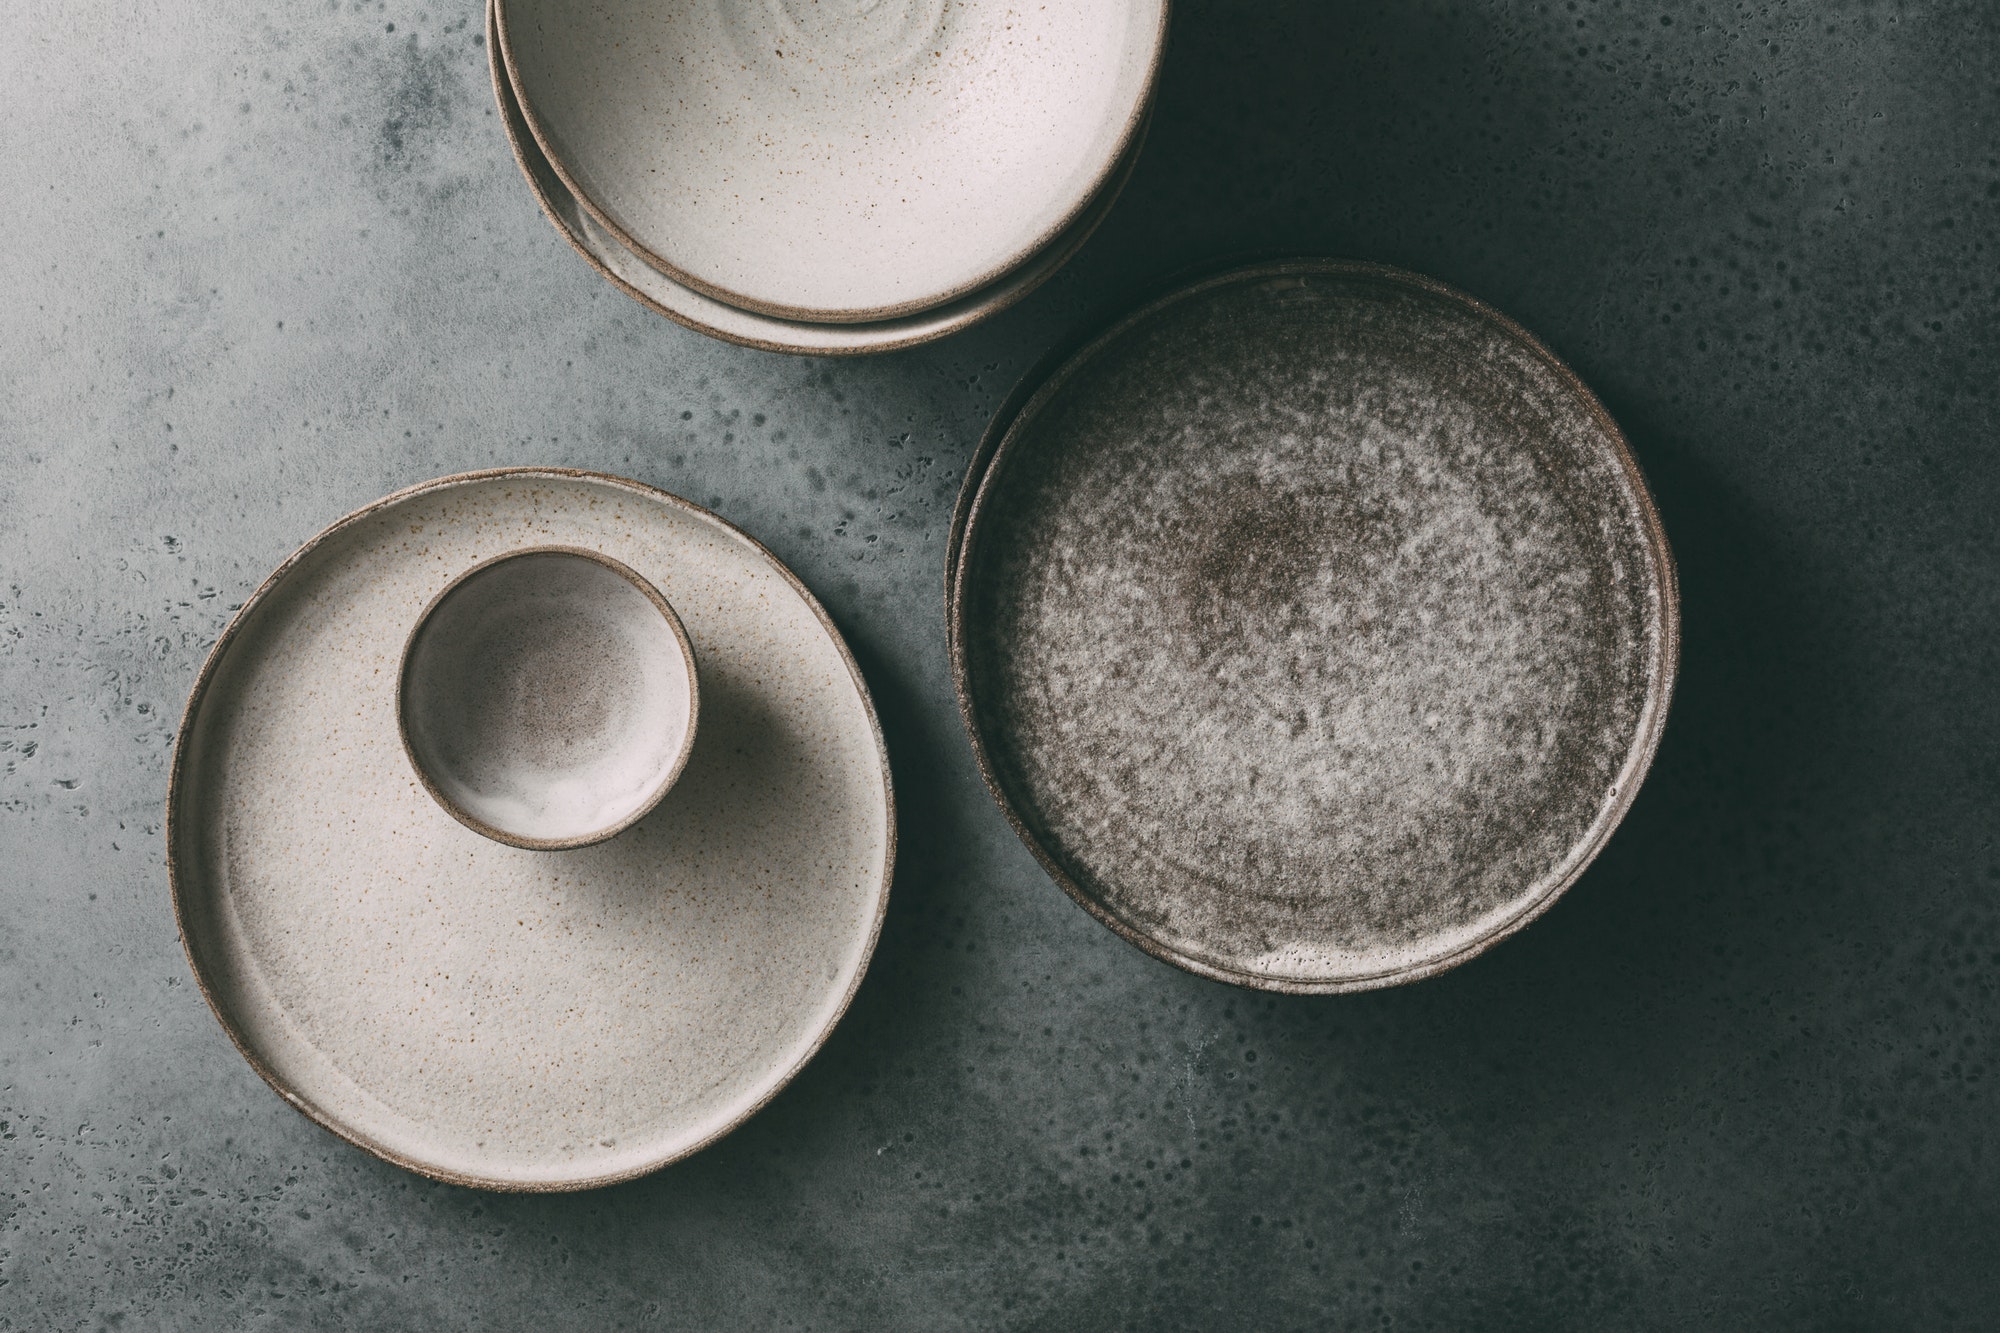 Empty ceramic bowls and plates